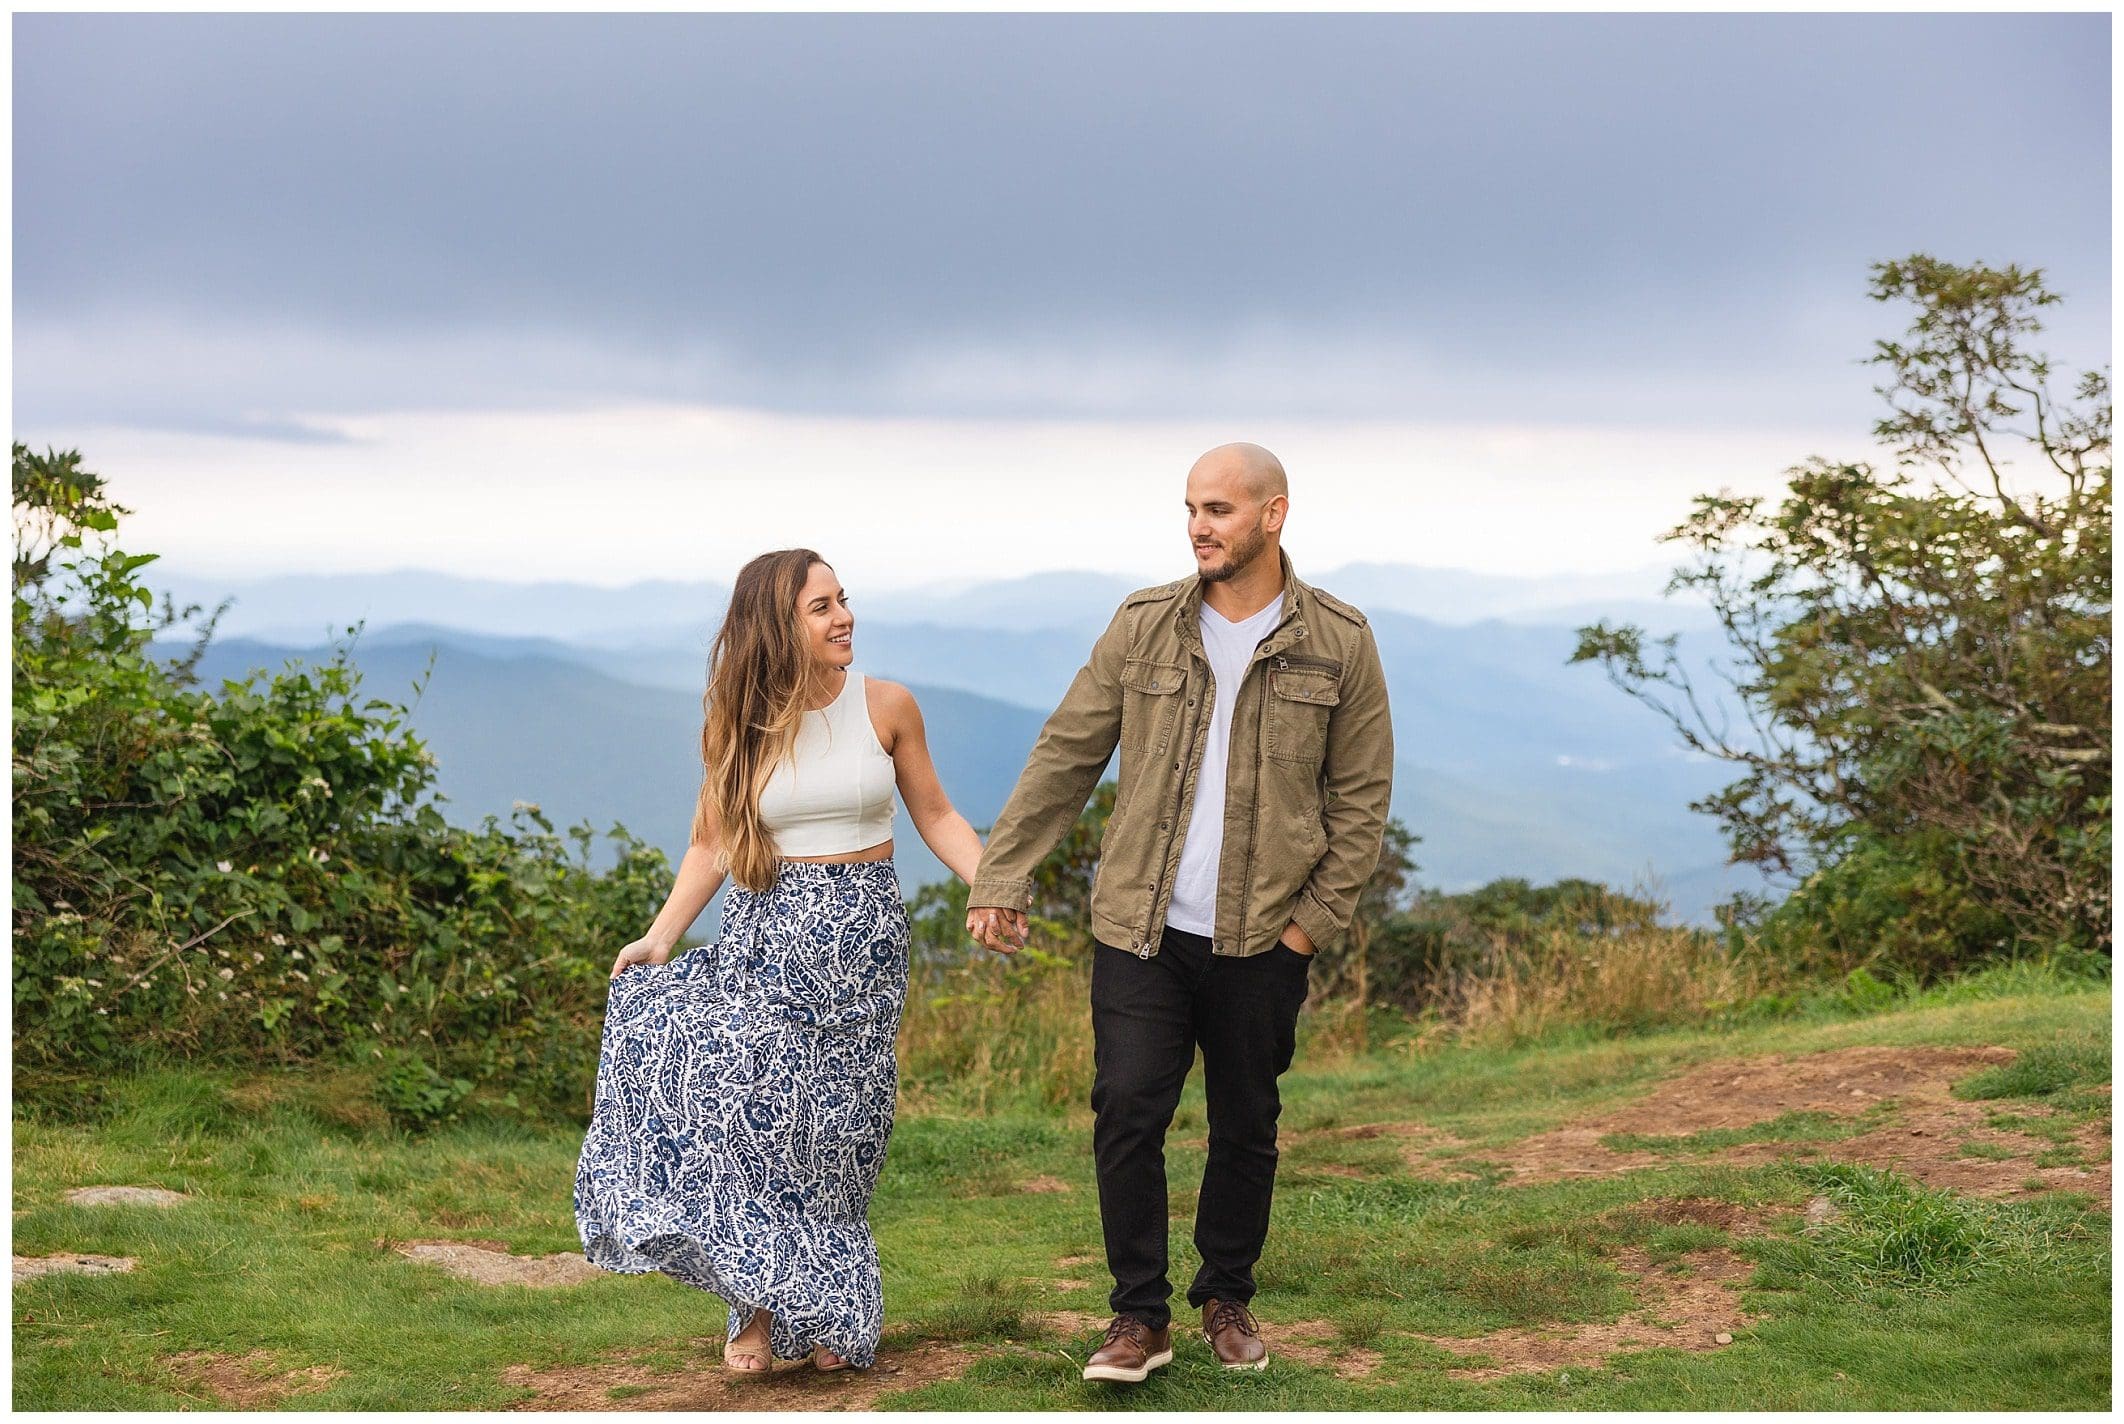 Couple walking together in front of the mountain backdrop for their Blue Ridge Parkway engagement session